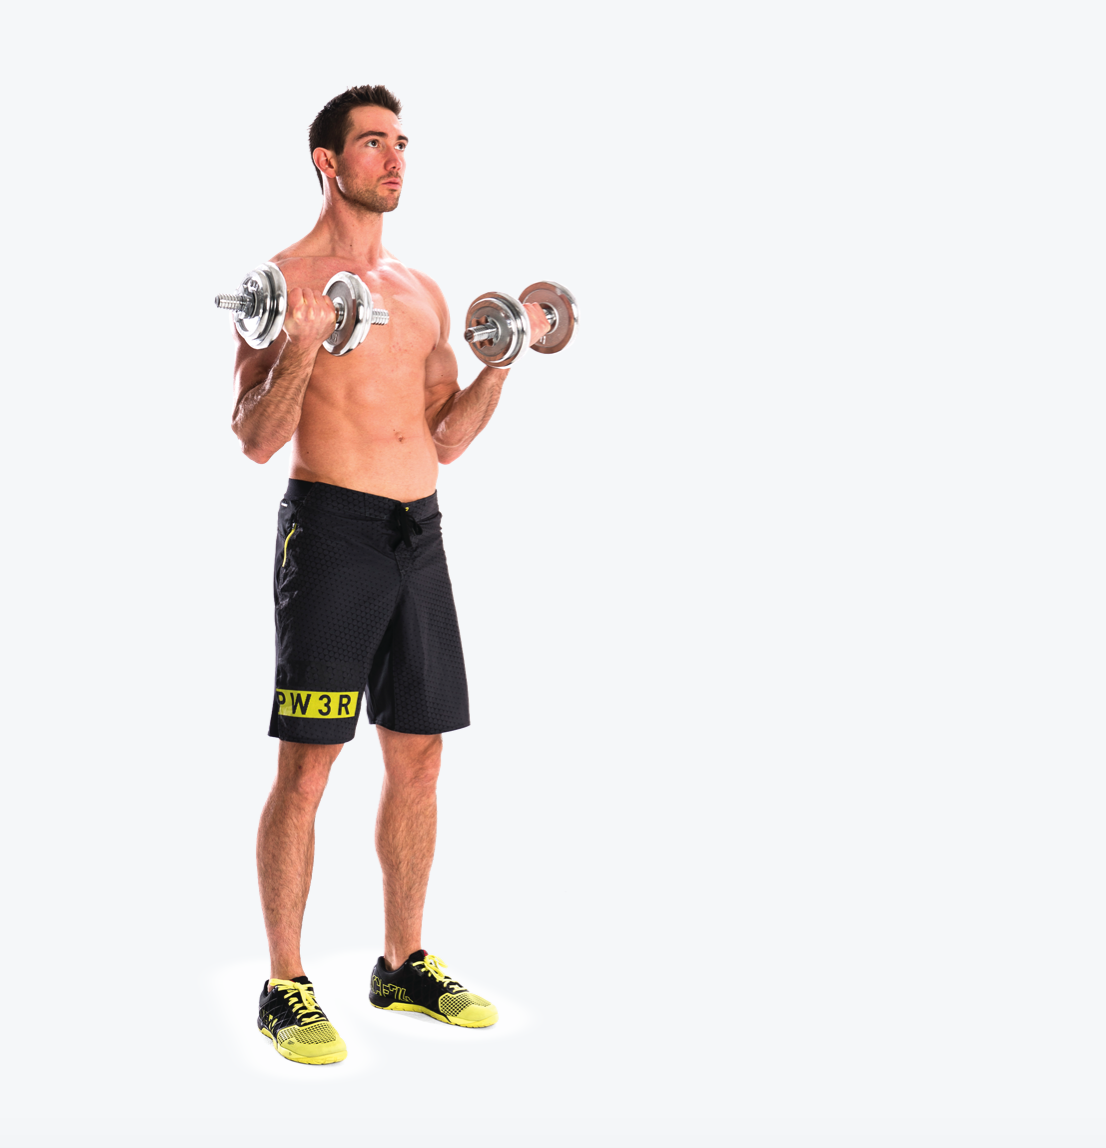 man demonstrated standing curl in dumbbell arm and shoulder workout; standing tall, he holds two dumbbells and repeatedly lifts and lowers them, keeping his elbows tucked in